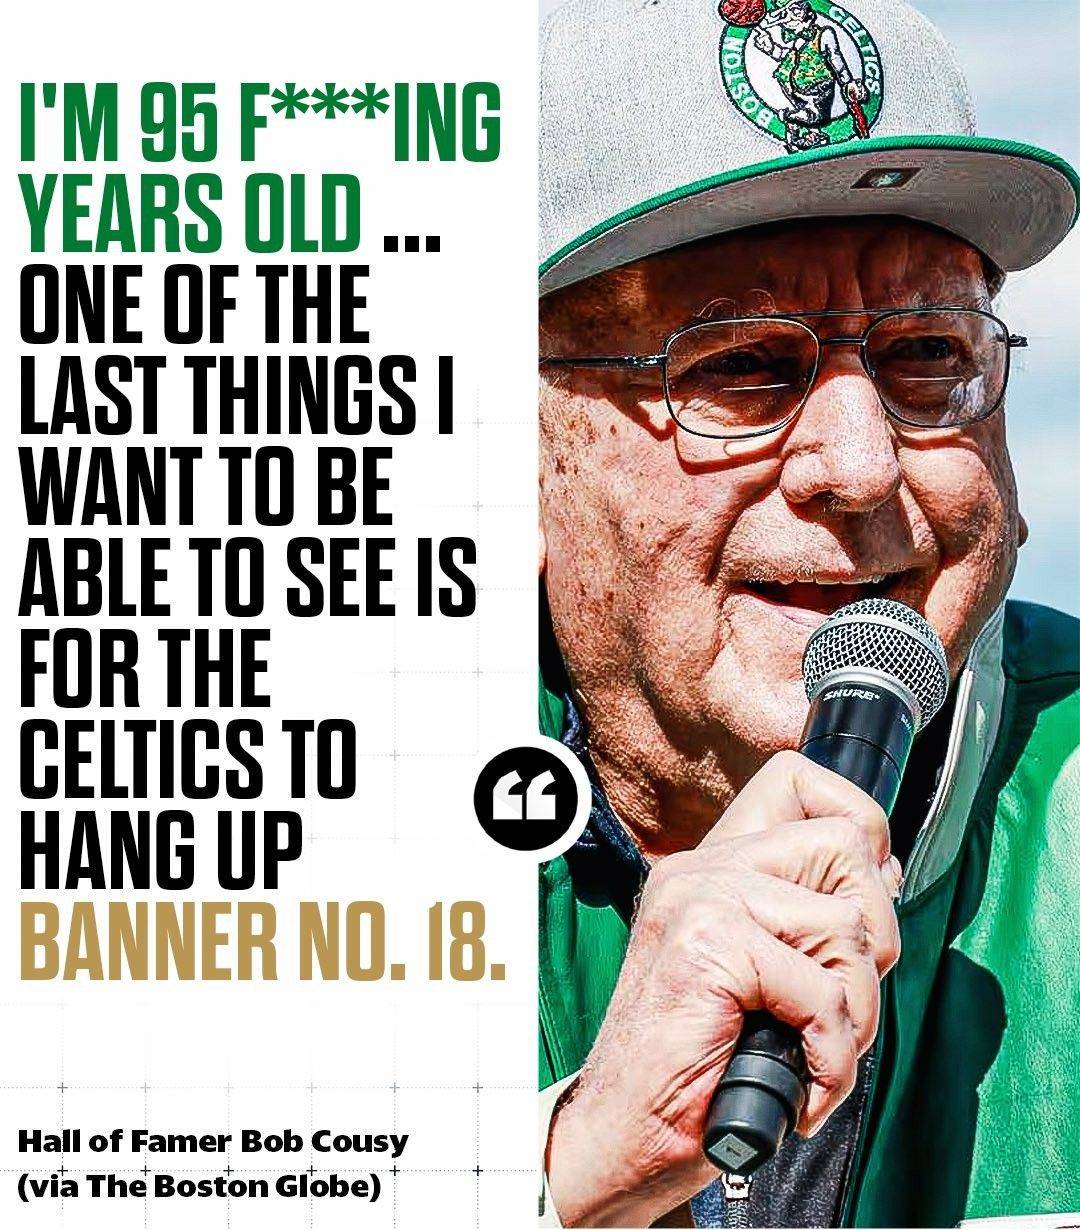 Bob Cousy, at 95: 'One foot in the grave,' hoping to see Celtics raise 18th championship banner in his life's overtime